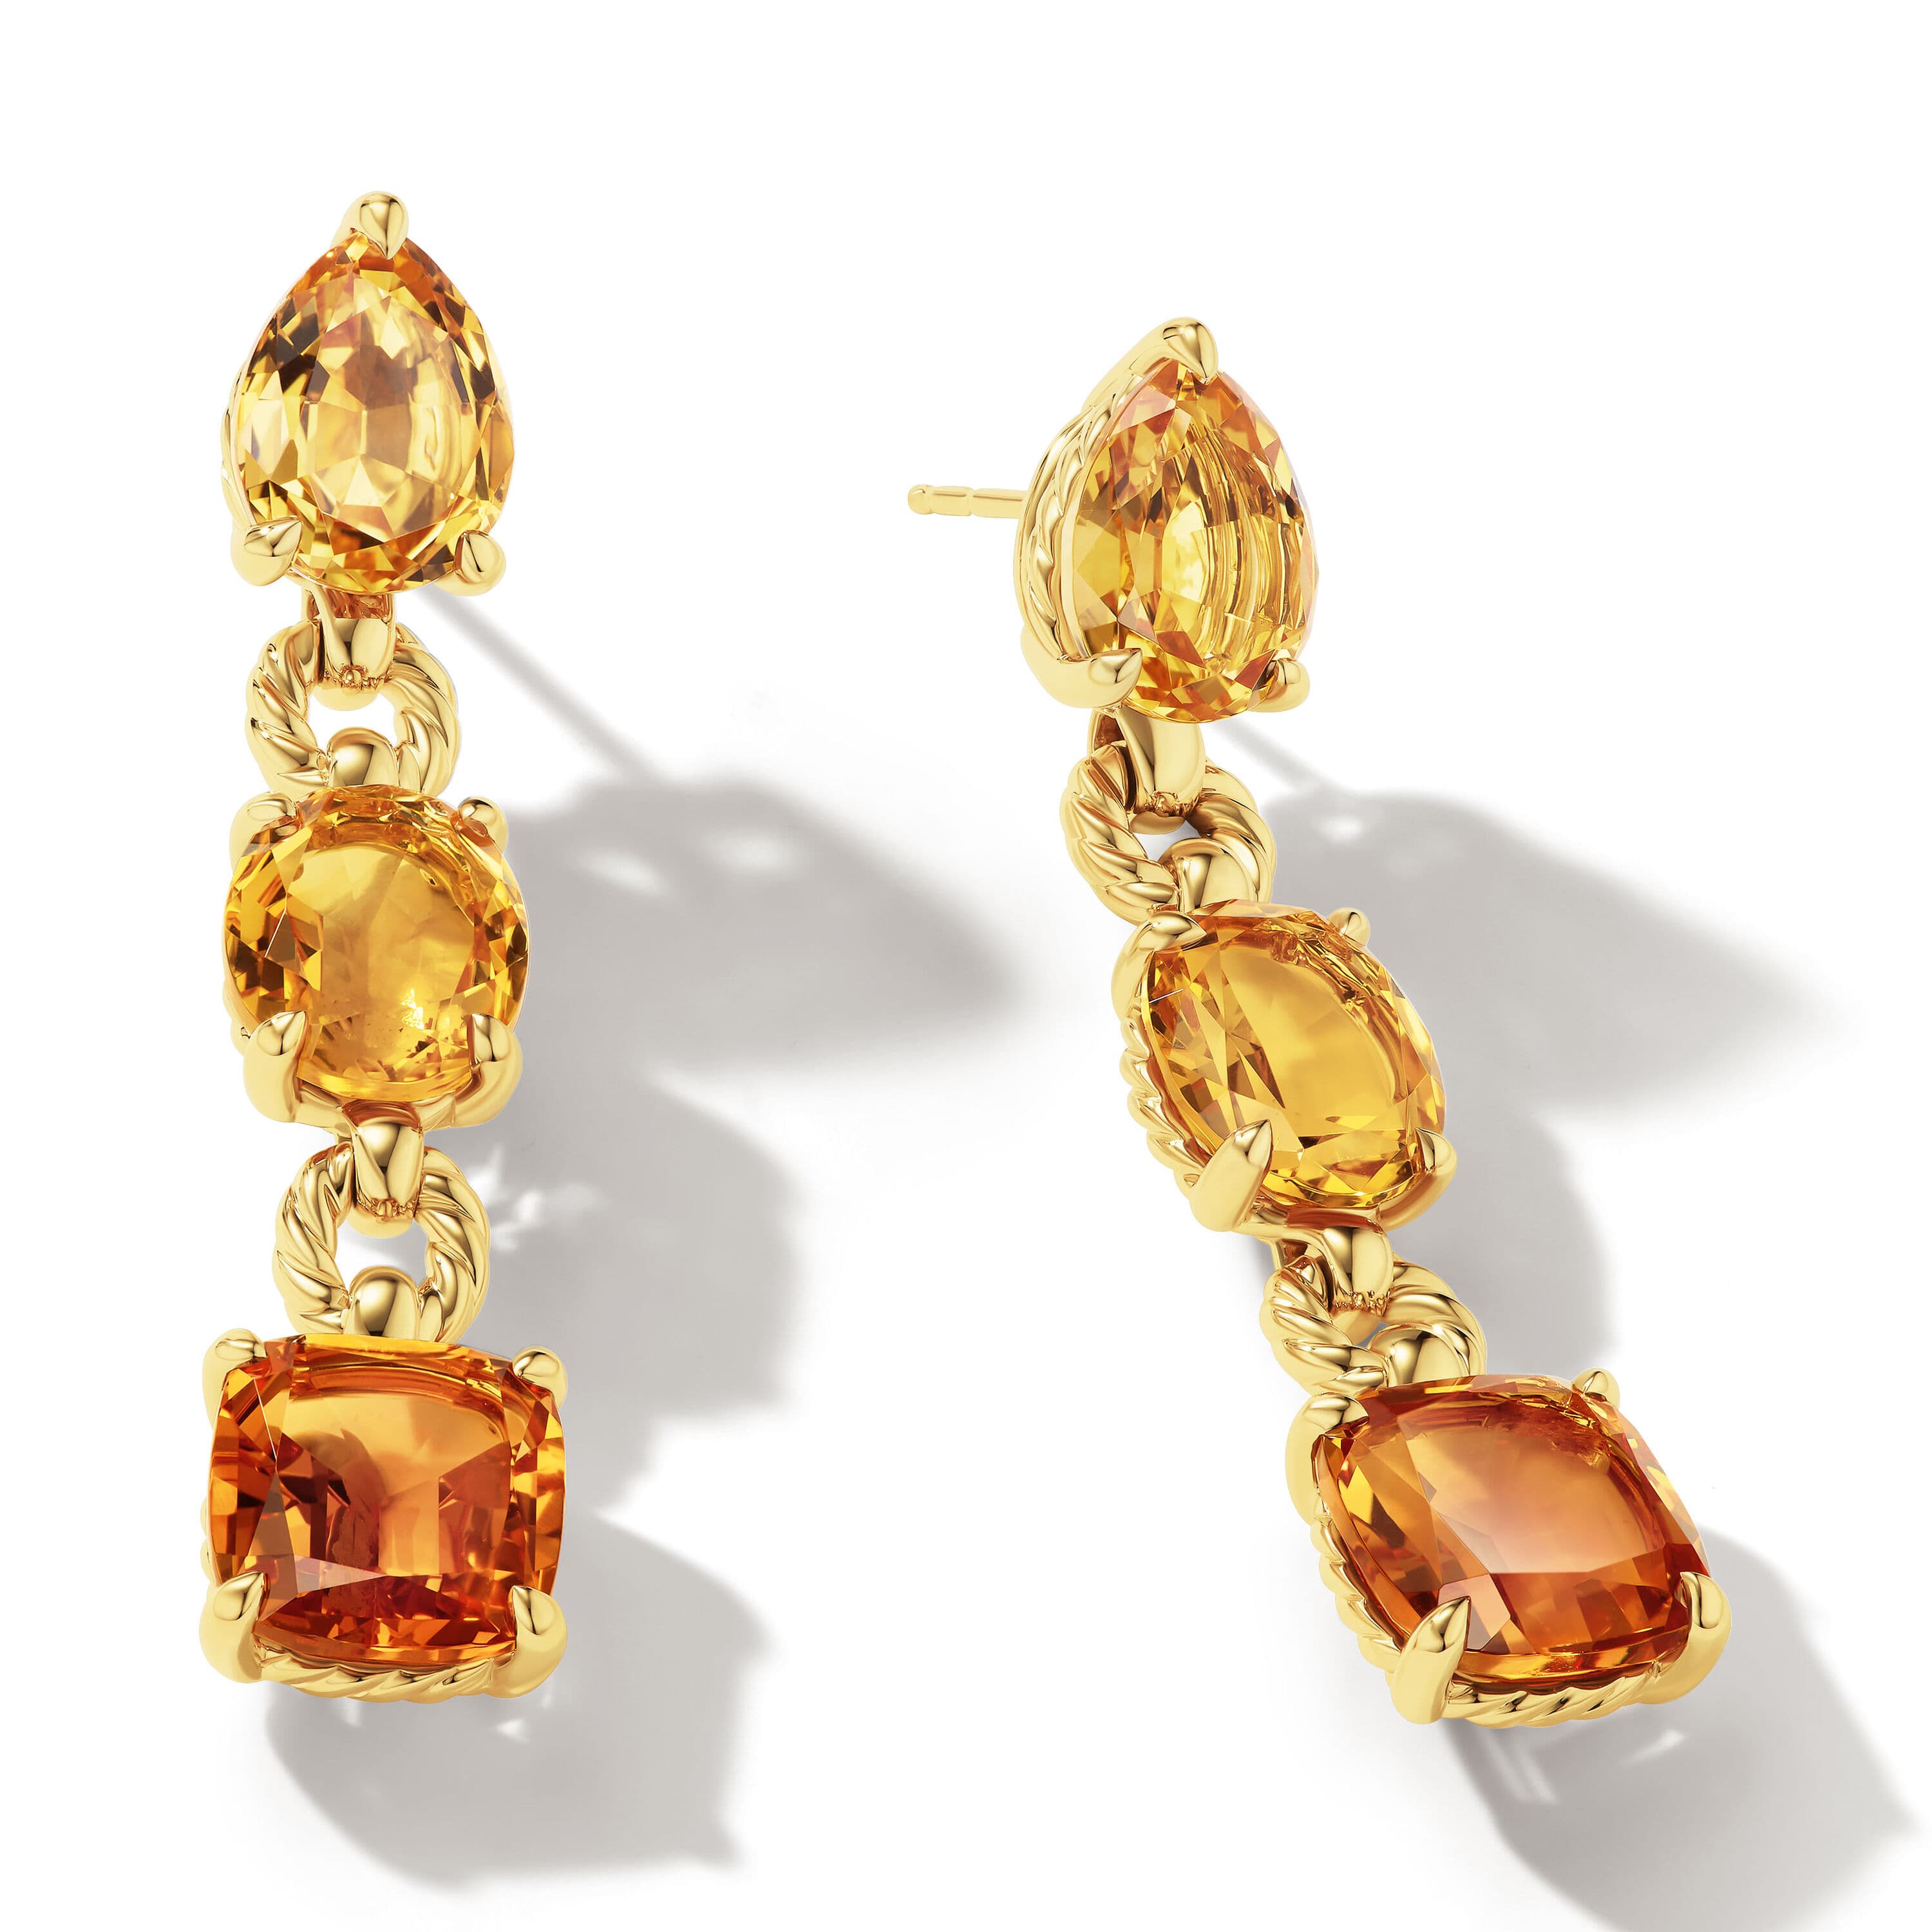 David Yurman Marbella Drop Earrings in 18K Yellow Gold with Citrine and Madeira Citrine 1